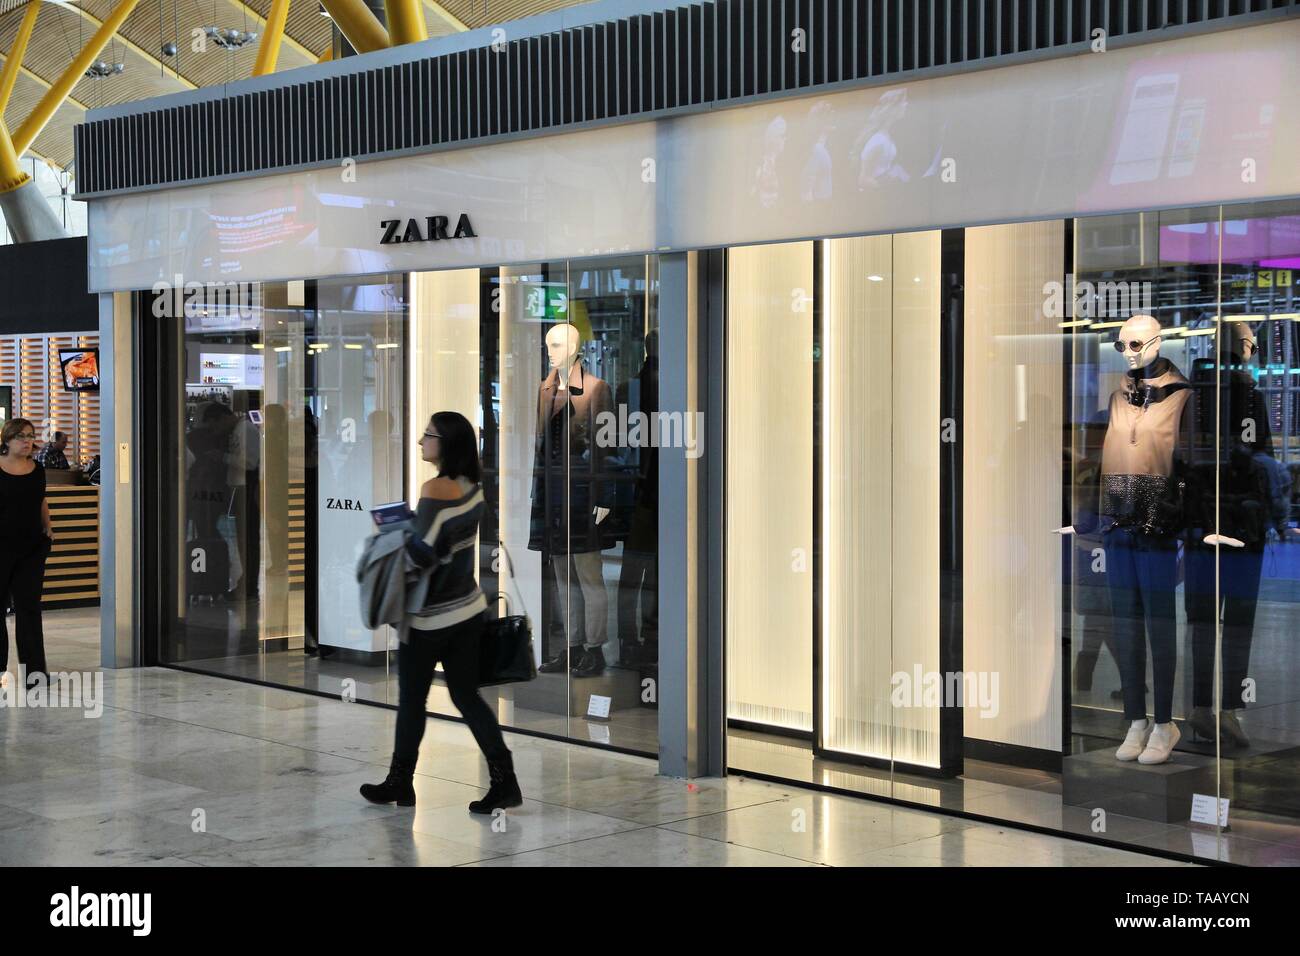 MADRID, SPAIN - OCTOBER 20, 2014: People visit Zara fashion store at Madrid  Barajas Airport T4. There are 63 shops in airport's Terminal 4 Stock Photo  - Alamy